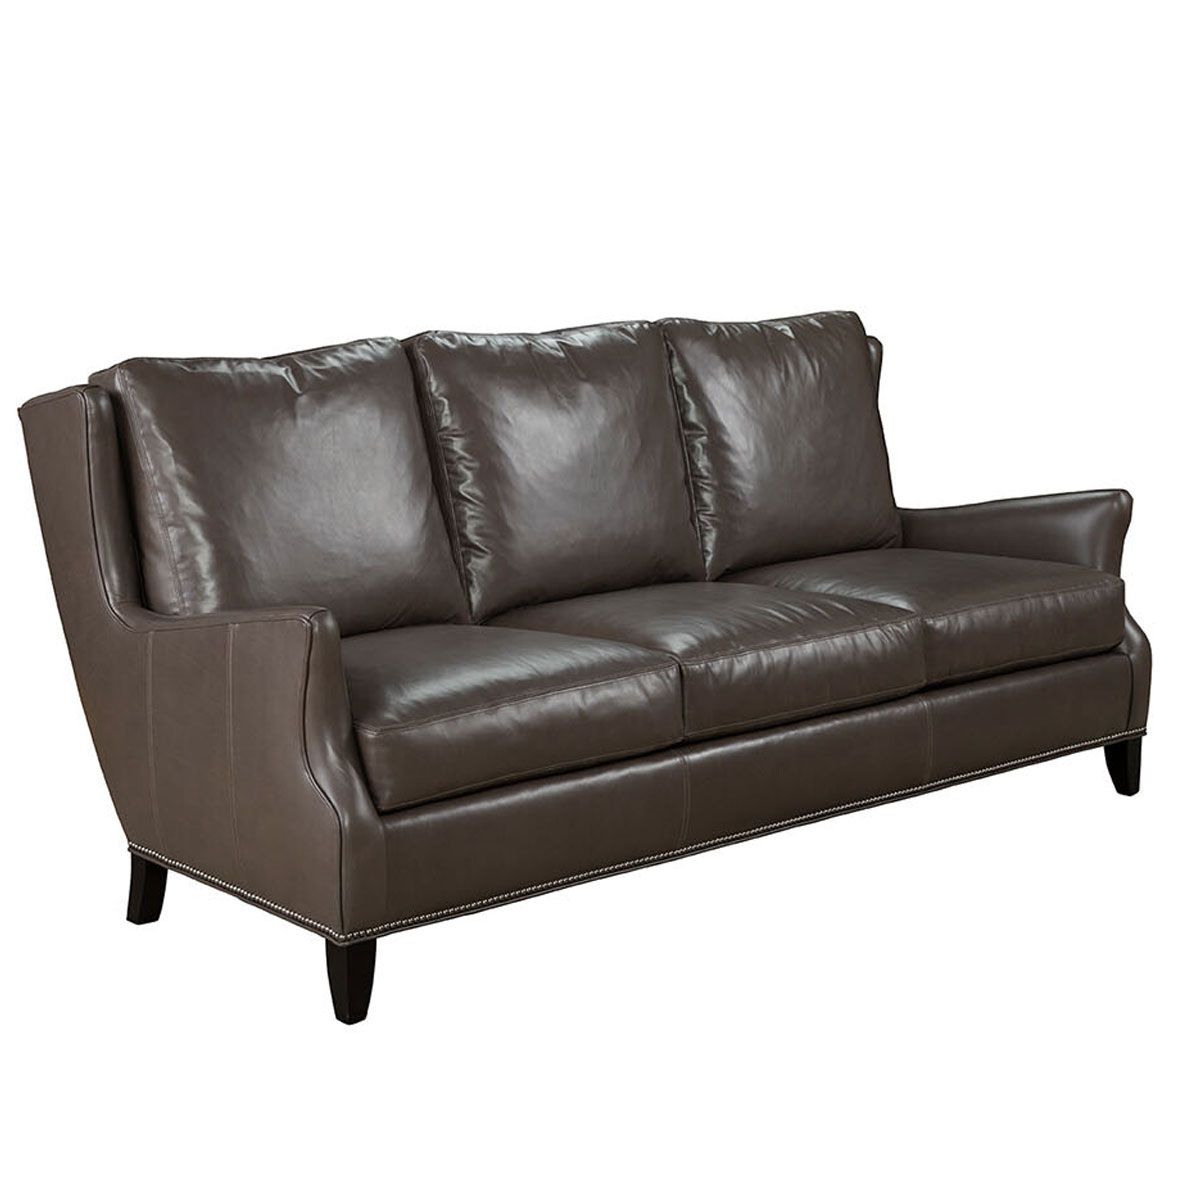 734 Tribeca Sofa by CC Leather